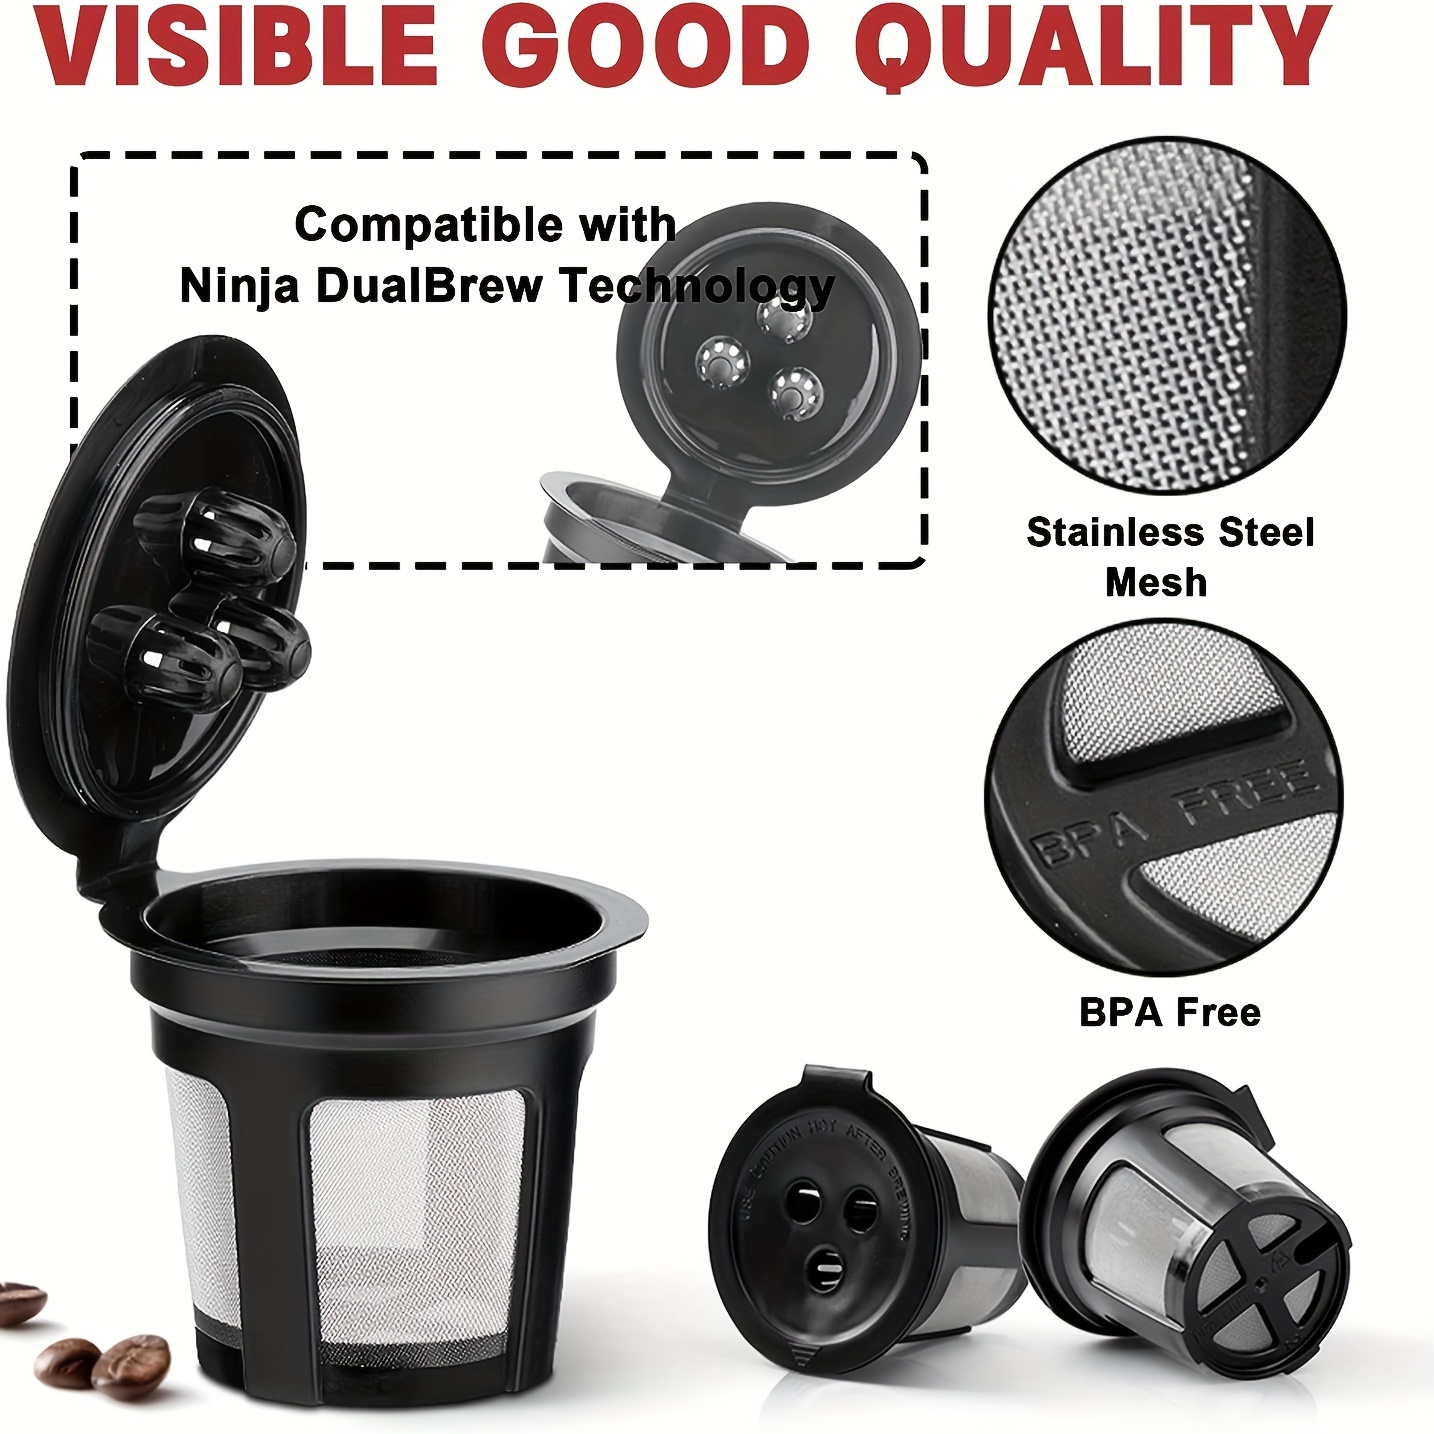 Reusable Pods For Ninja Dual Brew Coffee Maker Stainless - Temu